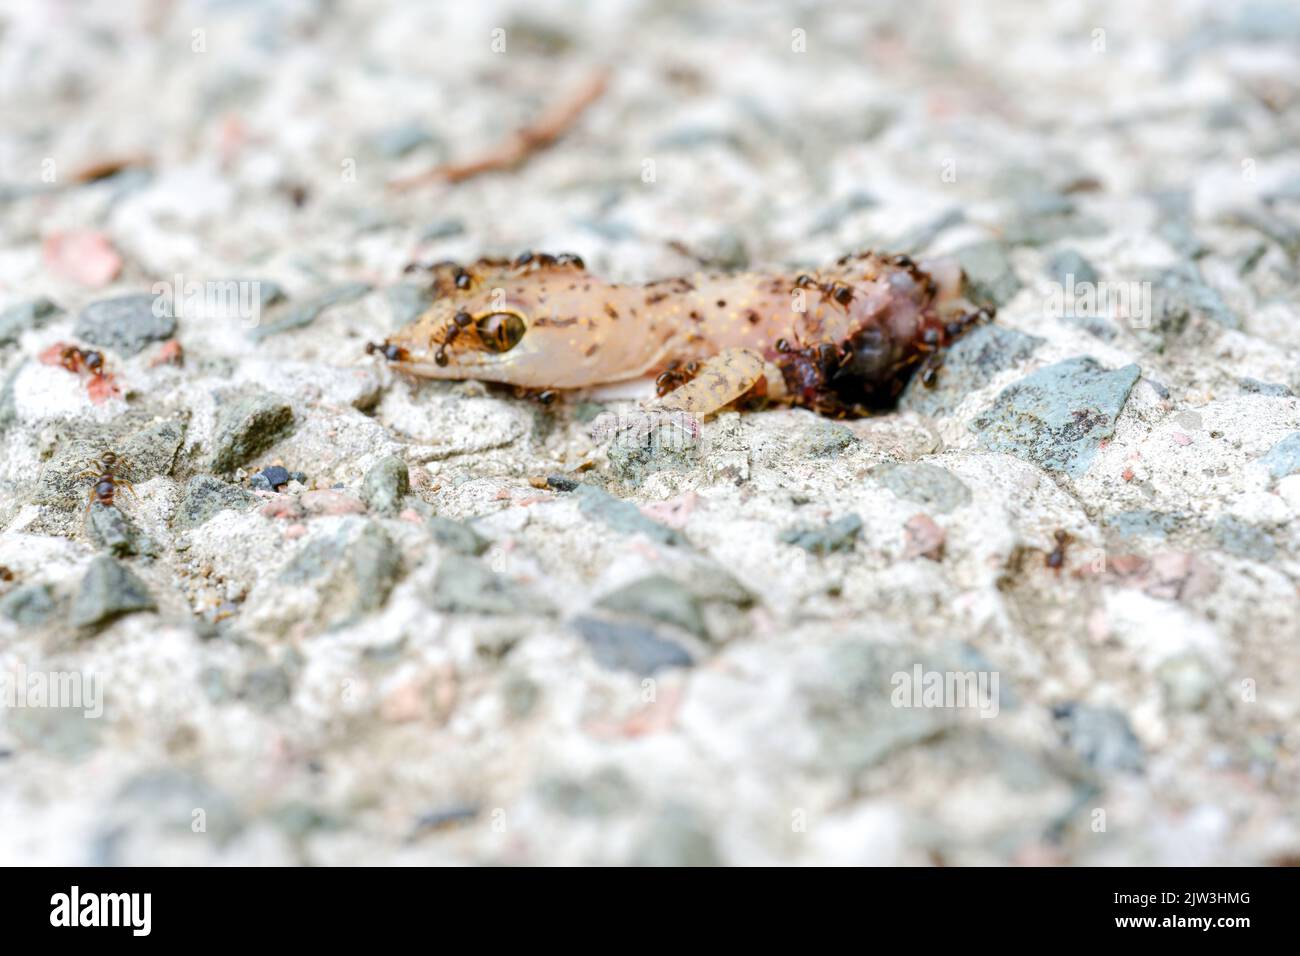 Ants and bee eating dead lizard body on the floor. Stock Photo